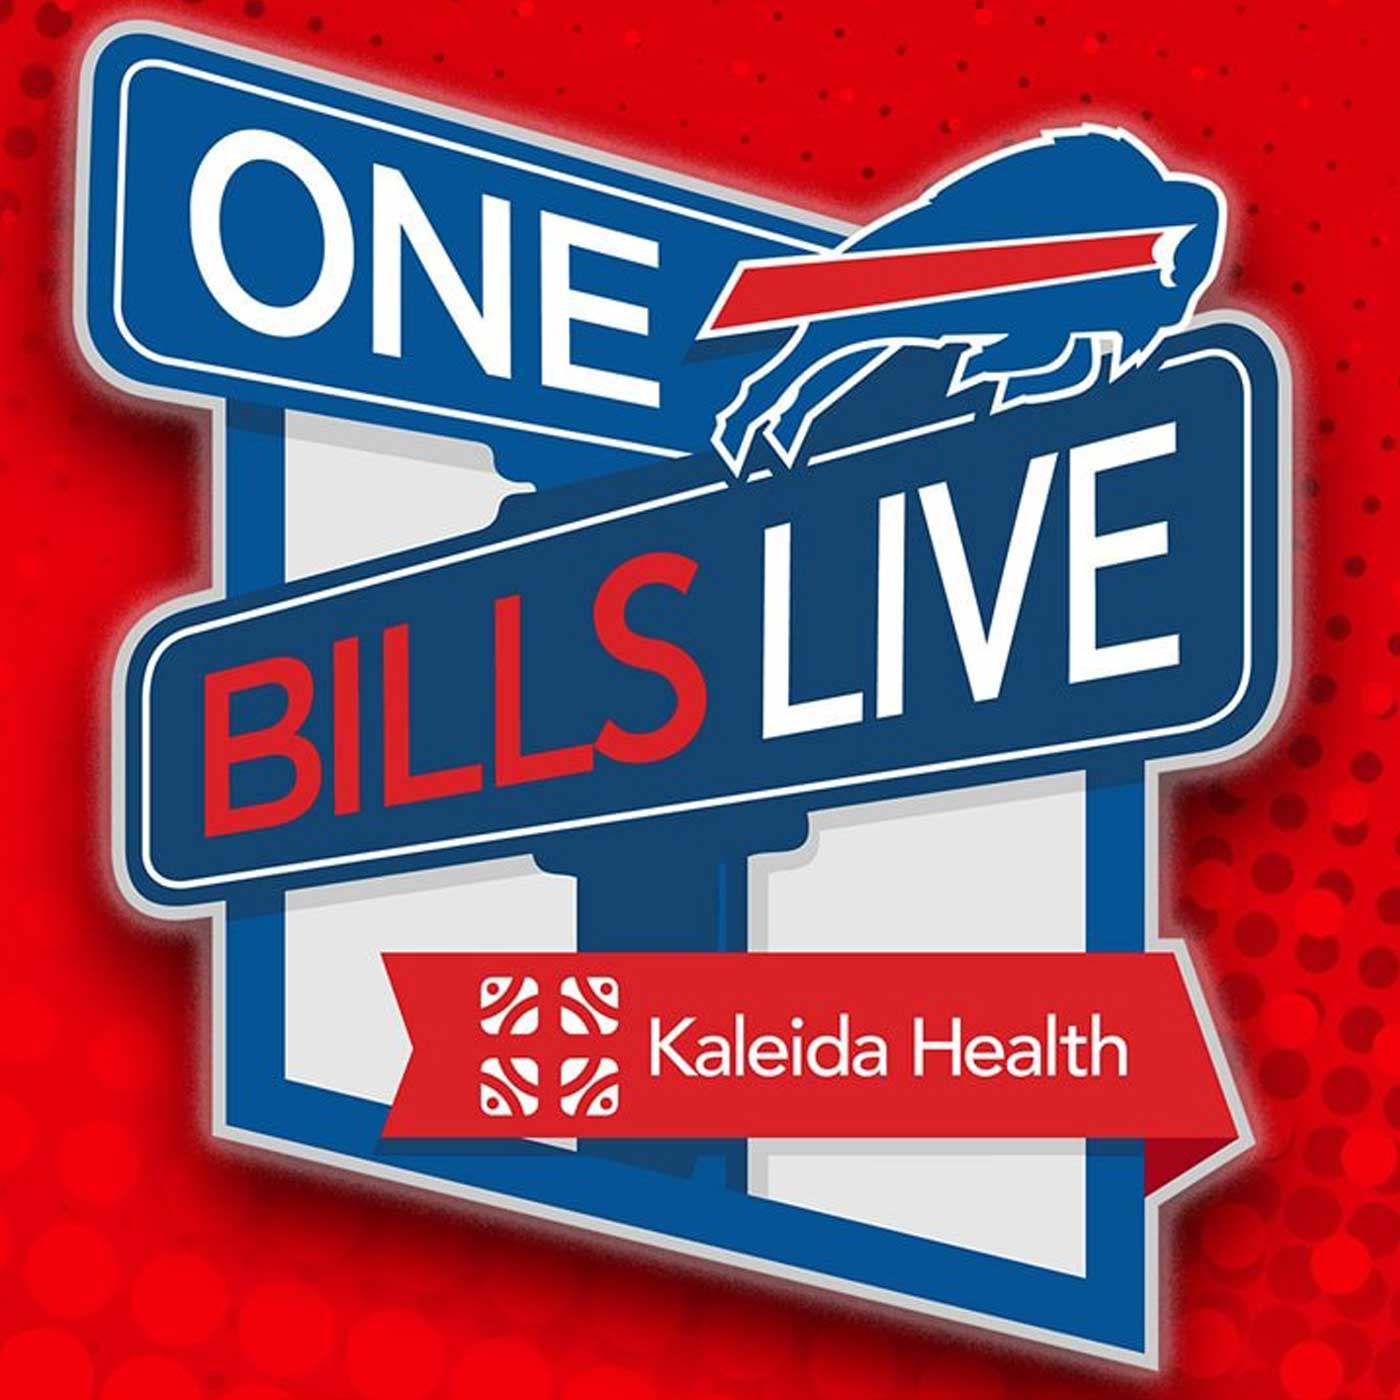 OBL 5/16: Bills come together to support the community, recapping NFL news & rookie minicamp